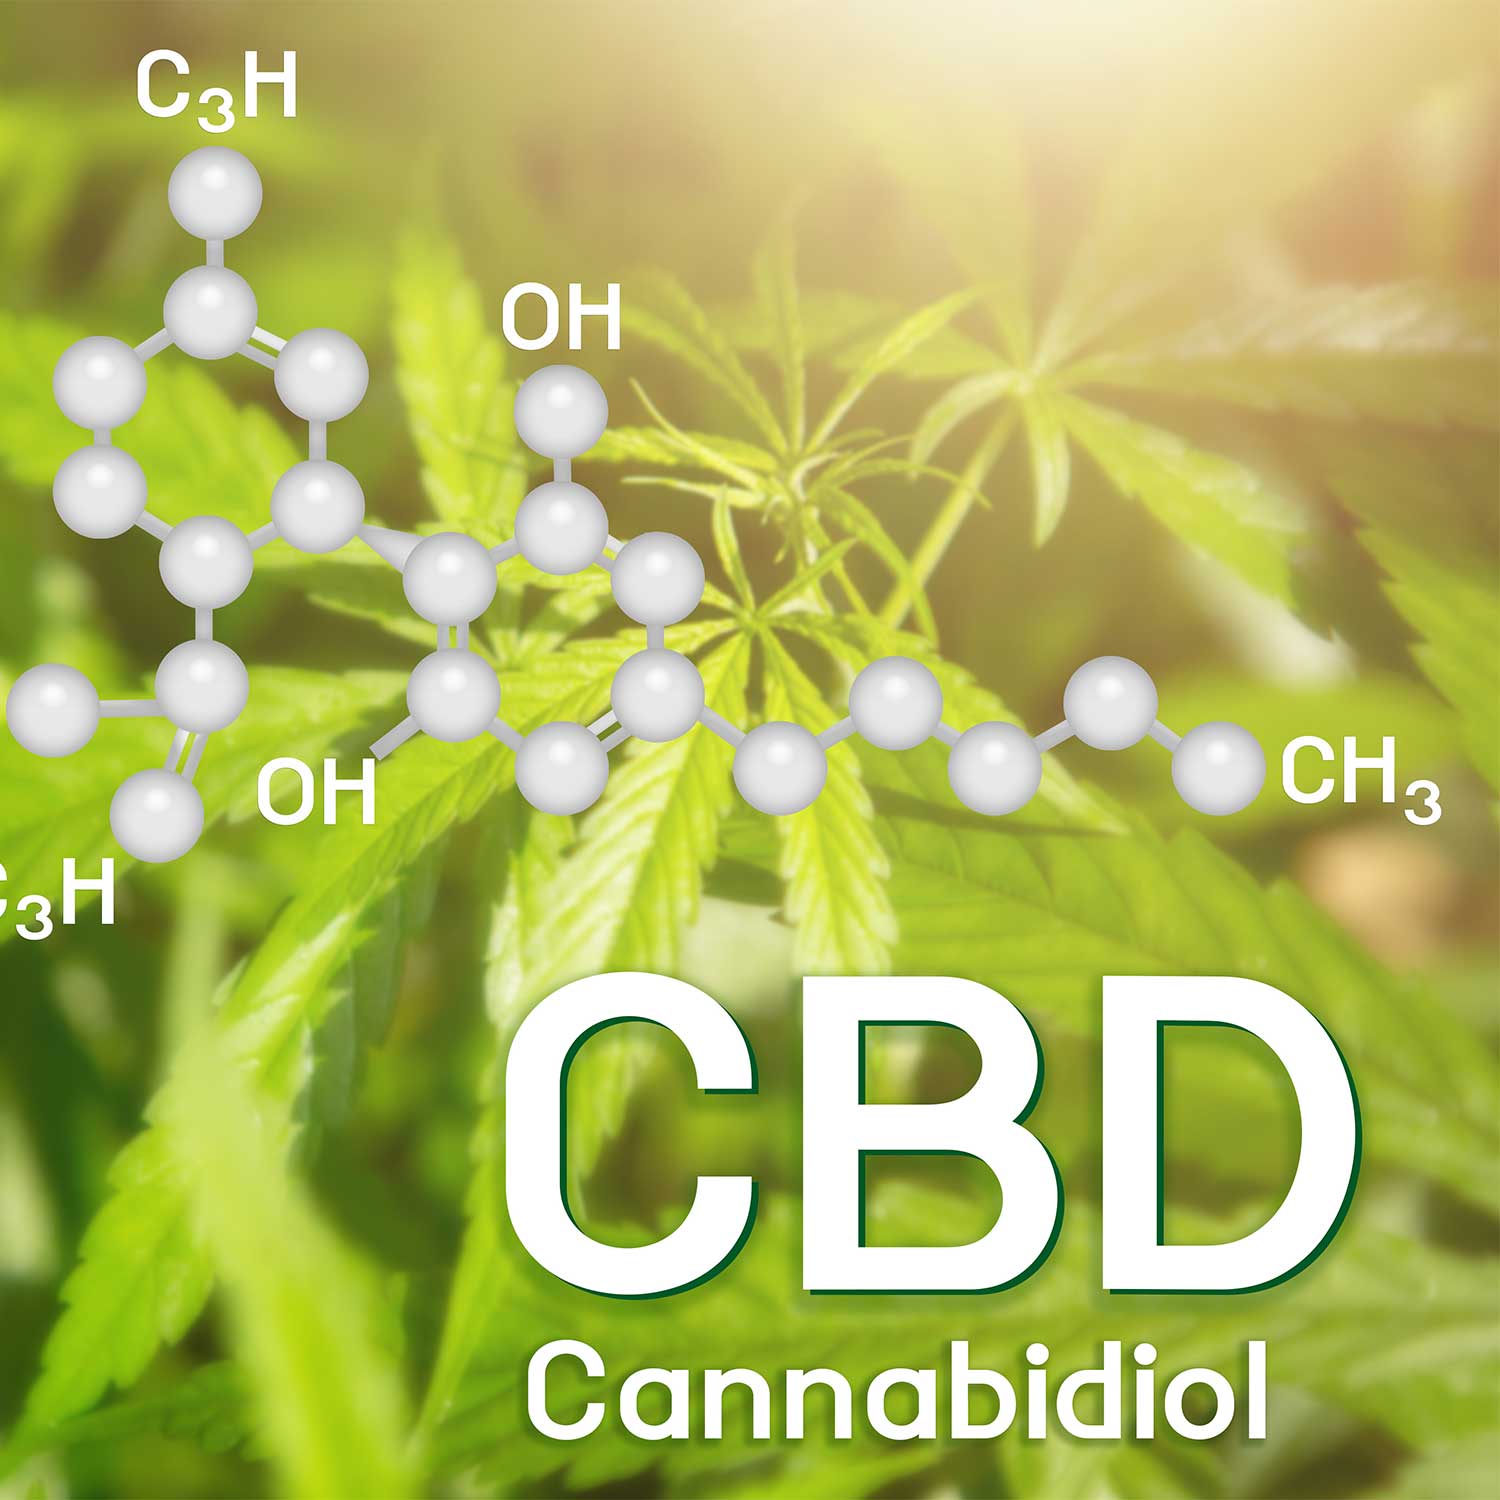 What is CBD and what can it help?